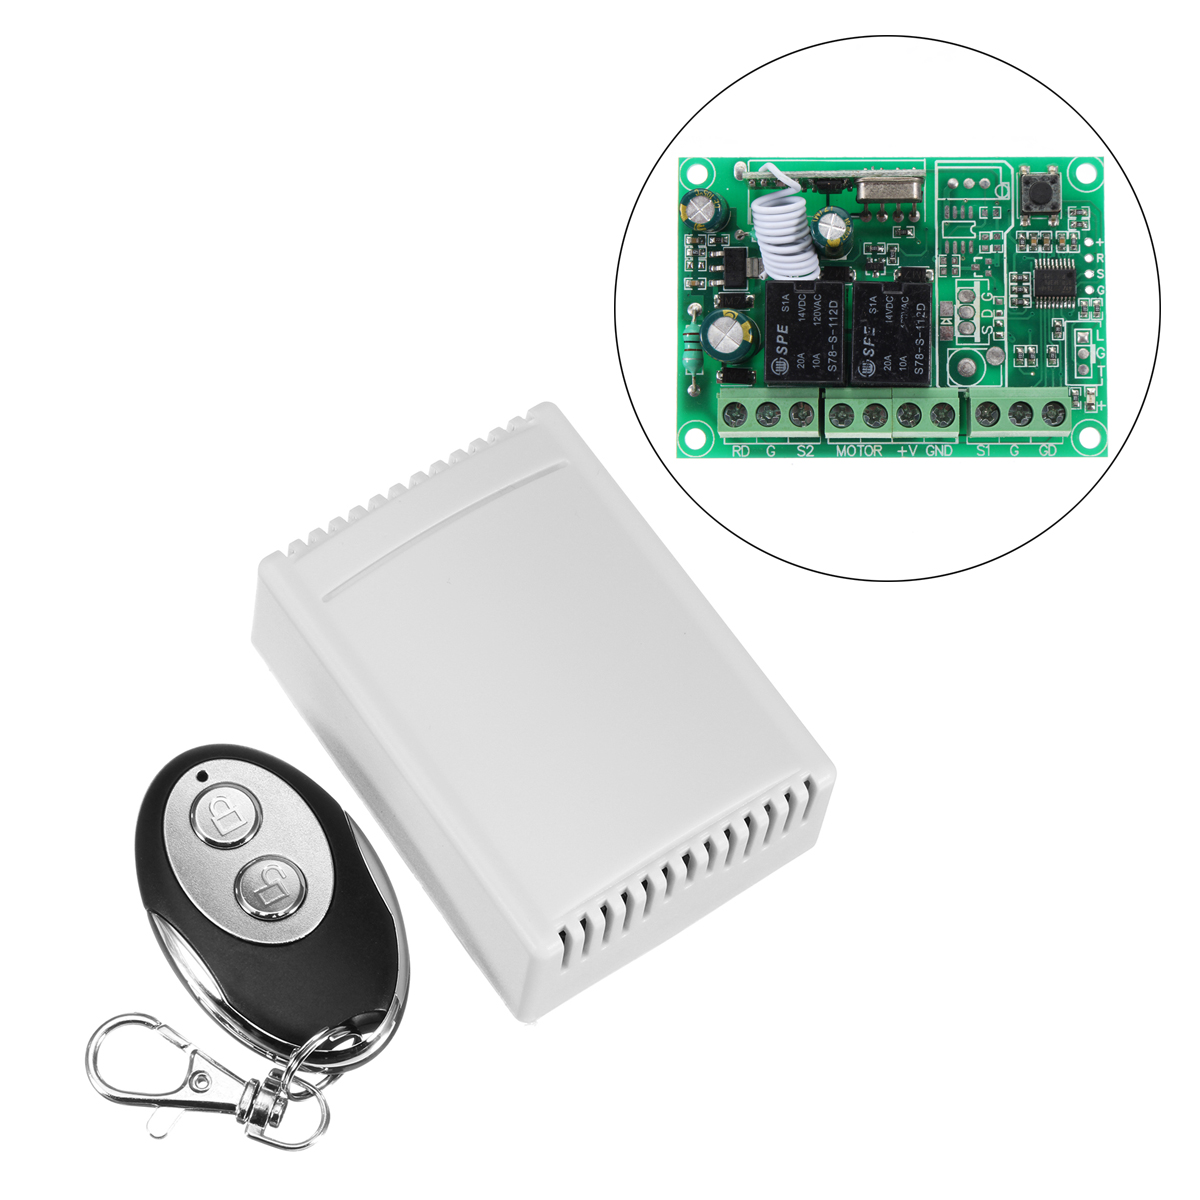 433Mhz-Wireless-RF-Switch-DC12V-Relay-Transmitter-Receiver-Module-and-433-Mhz-Remote-Controls-For-DC-1358262